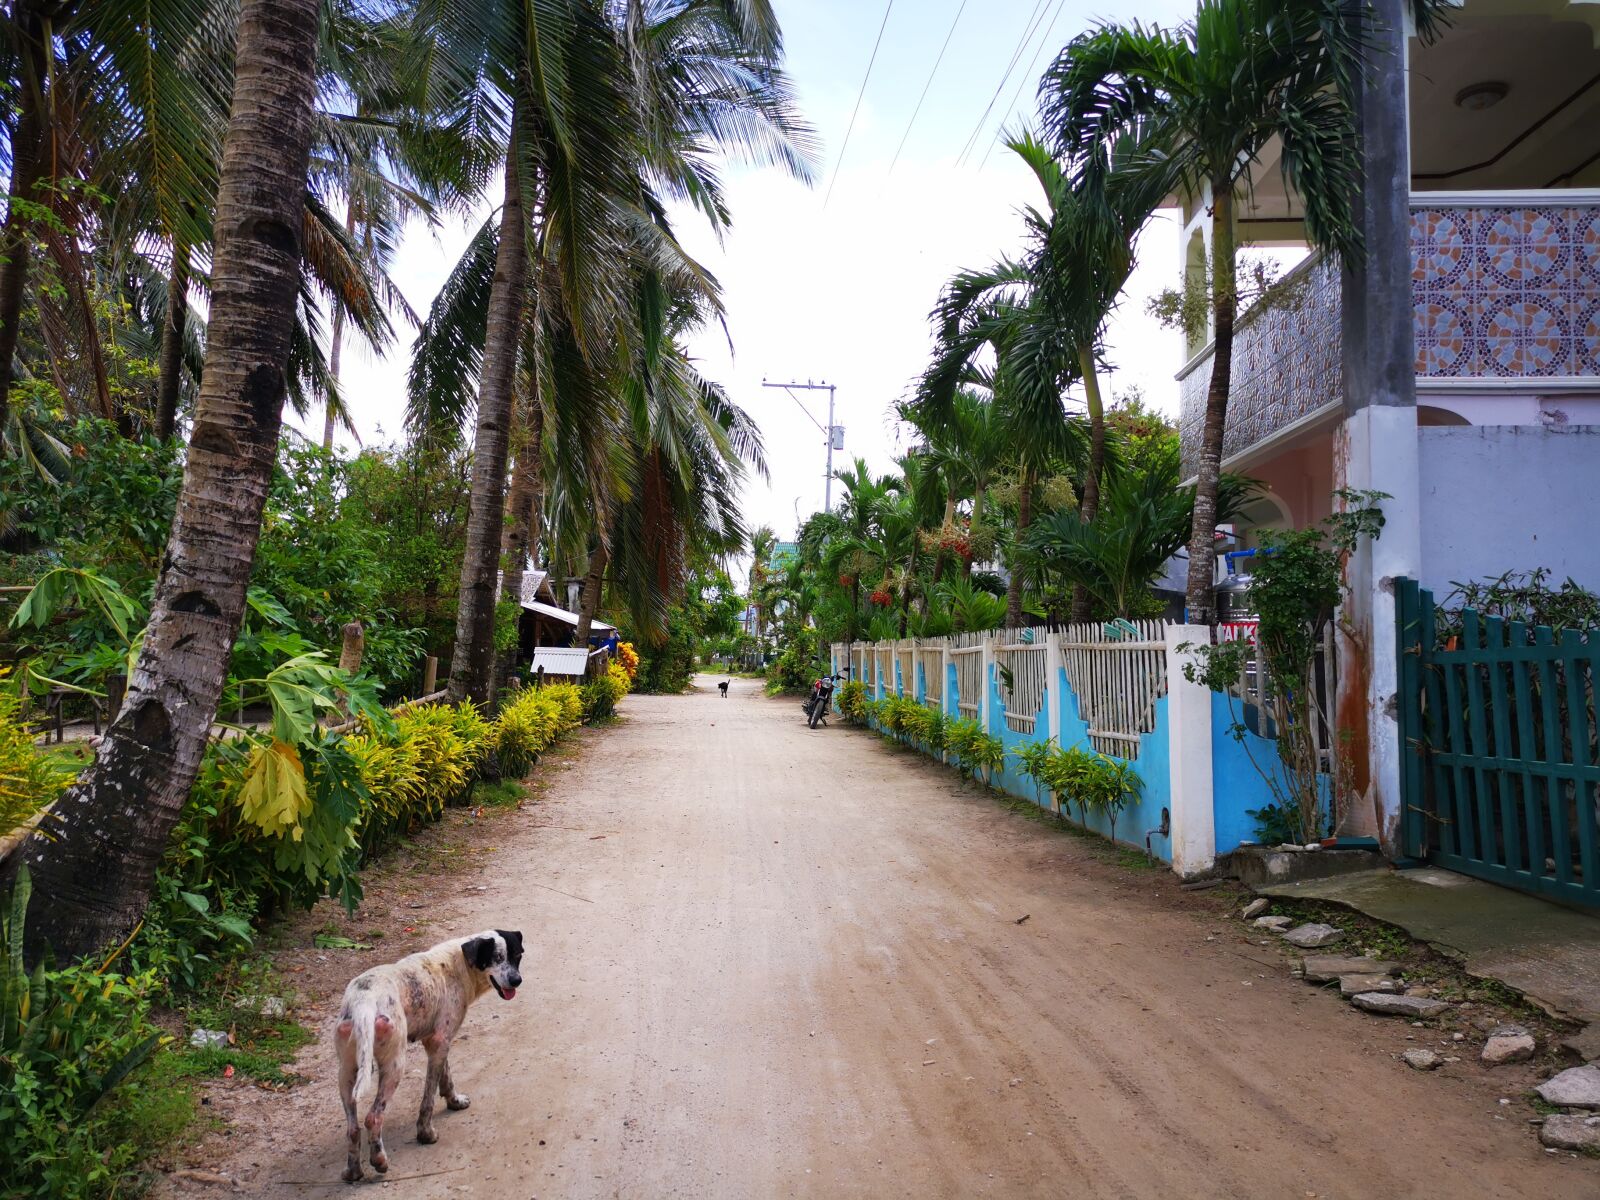 HUAWEI Mate 20 Pro sample photo. Coconut trees, dog, road photography